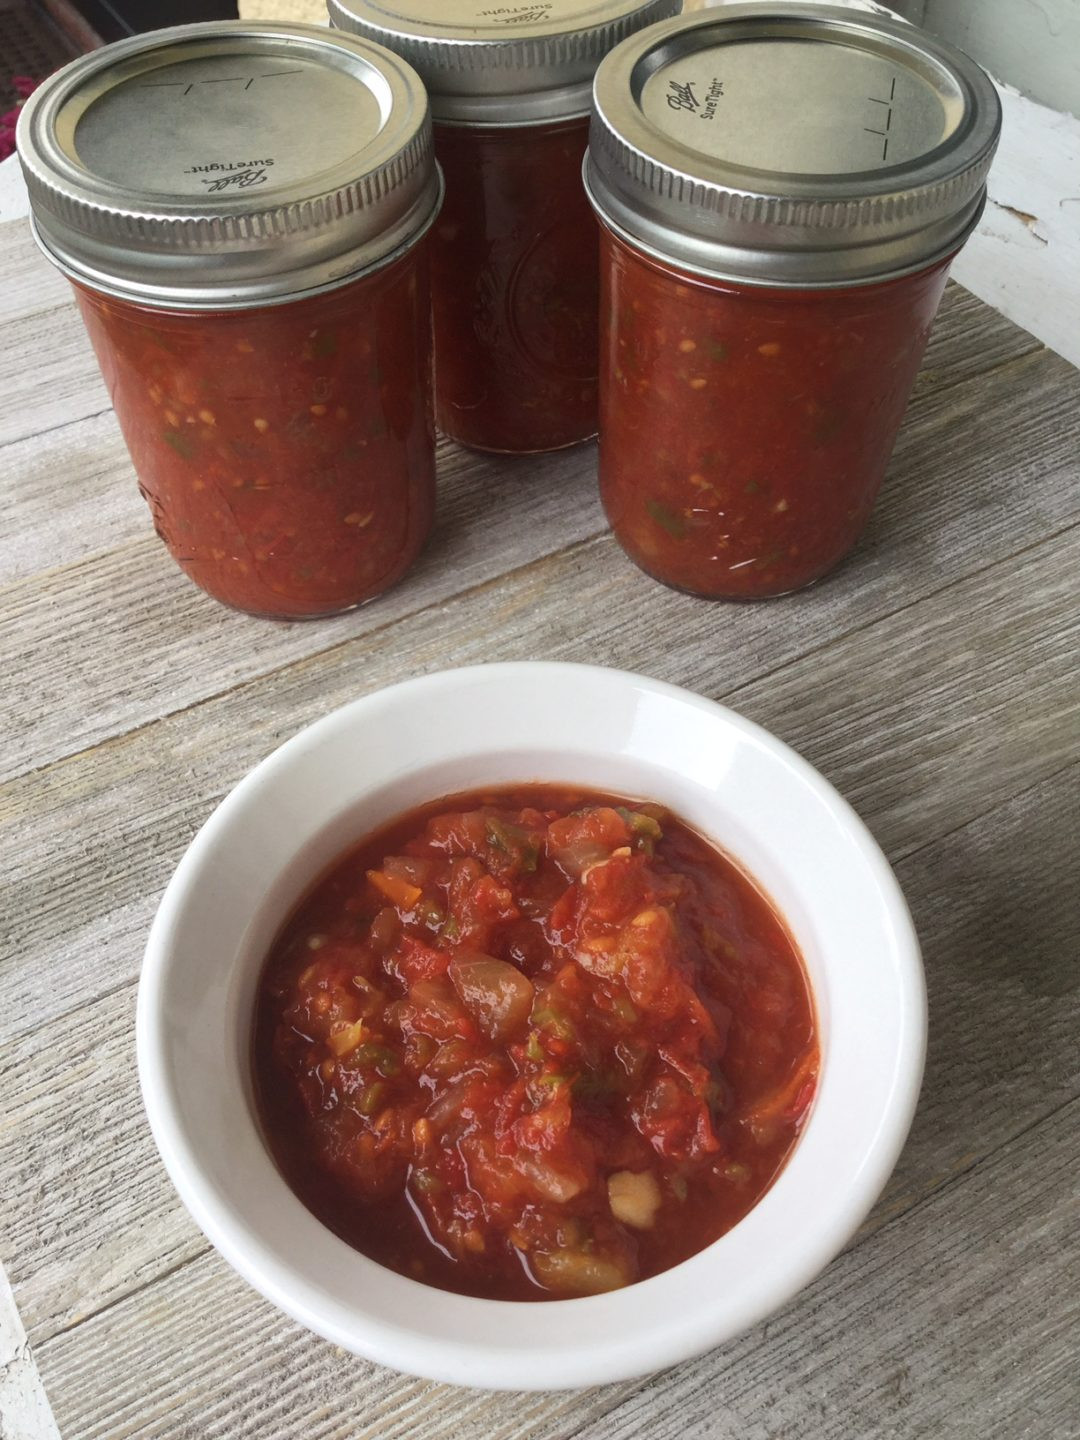 Best Homemade Salsa Recipe Ever
 The Best Homemade Salsa for Canning My Healthy